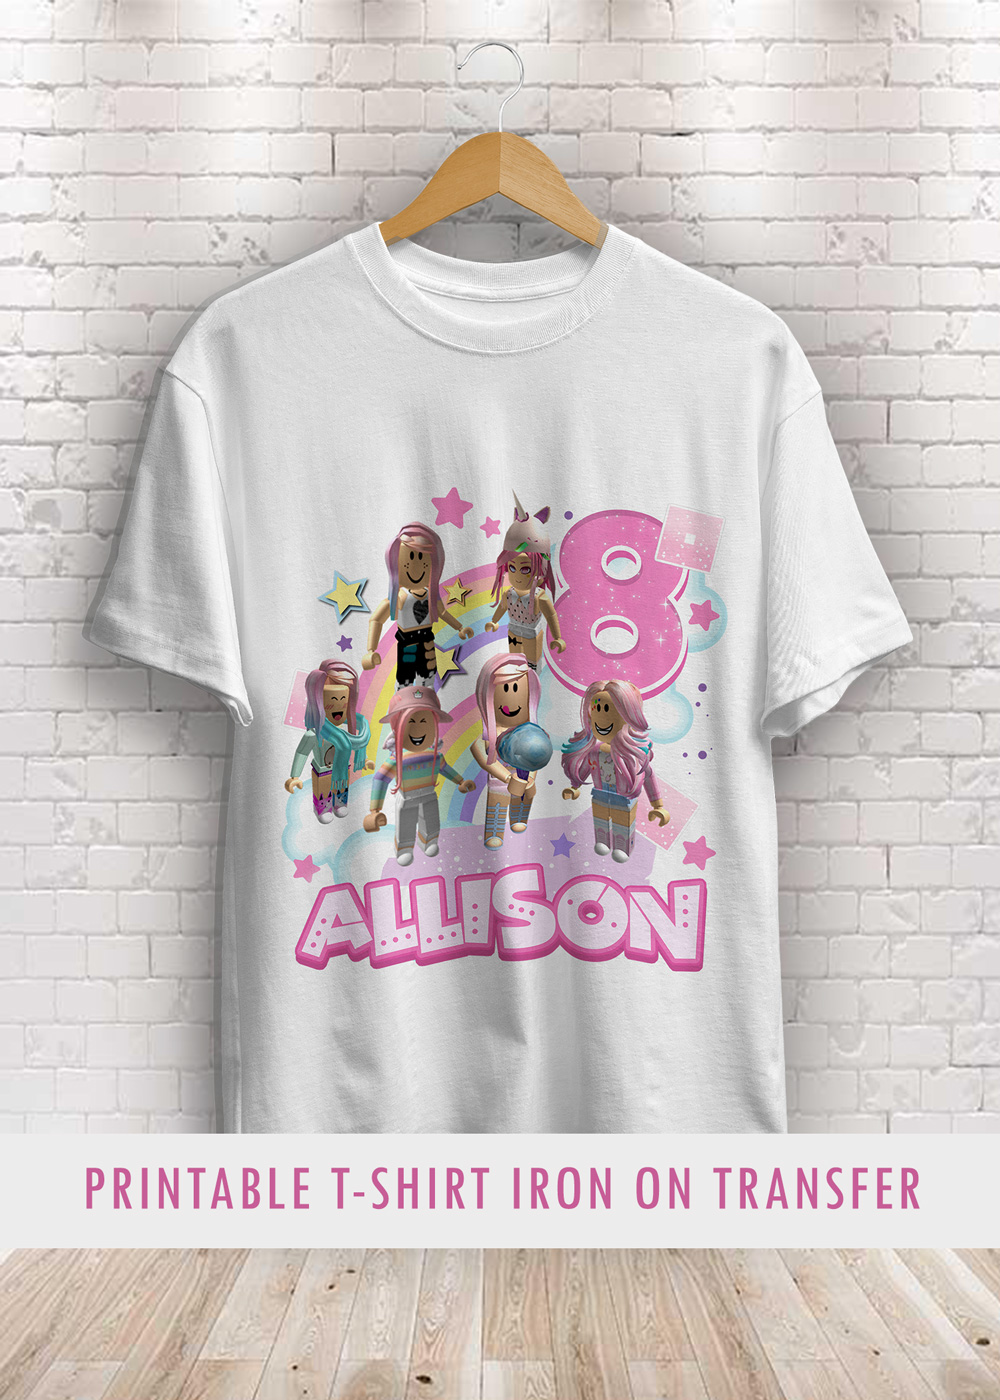 ROBLOX THEME GIRLS PERSONALISED BIRTHDAY T-SHIRT ANY NAME,NUMBER, FONT  COLOUR